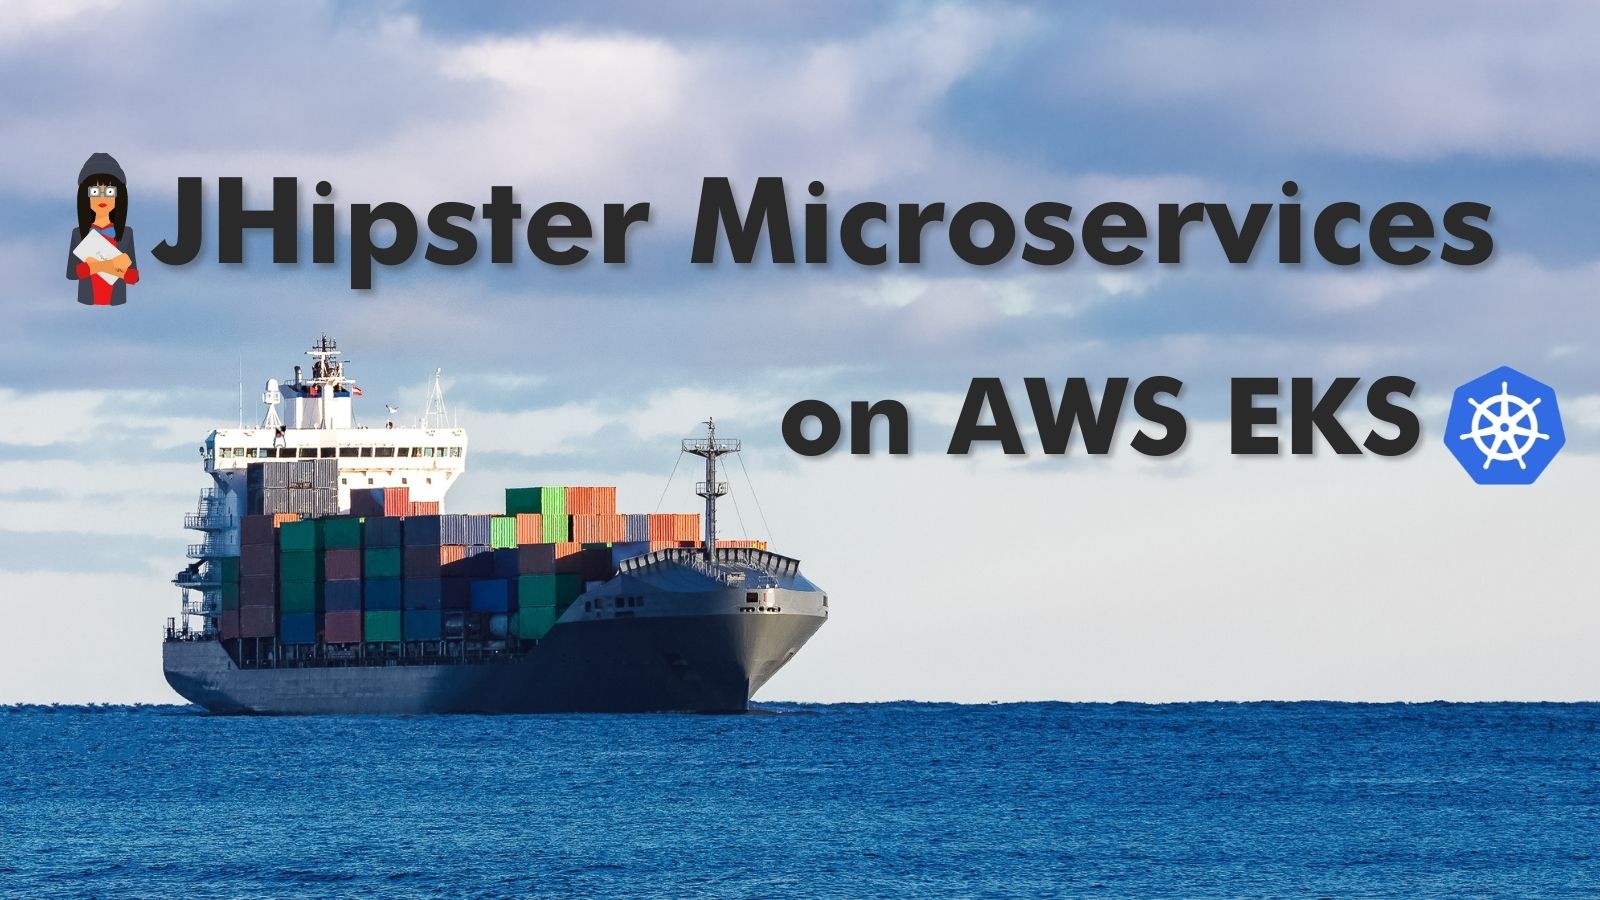 JHipster Microservices on AWS with Amazon Elastic Kubernetes Service